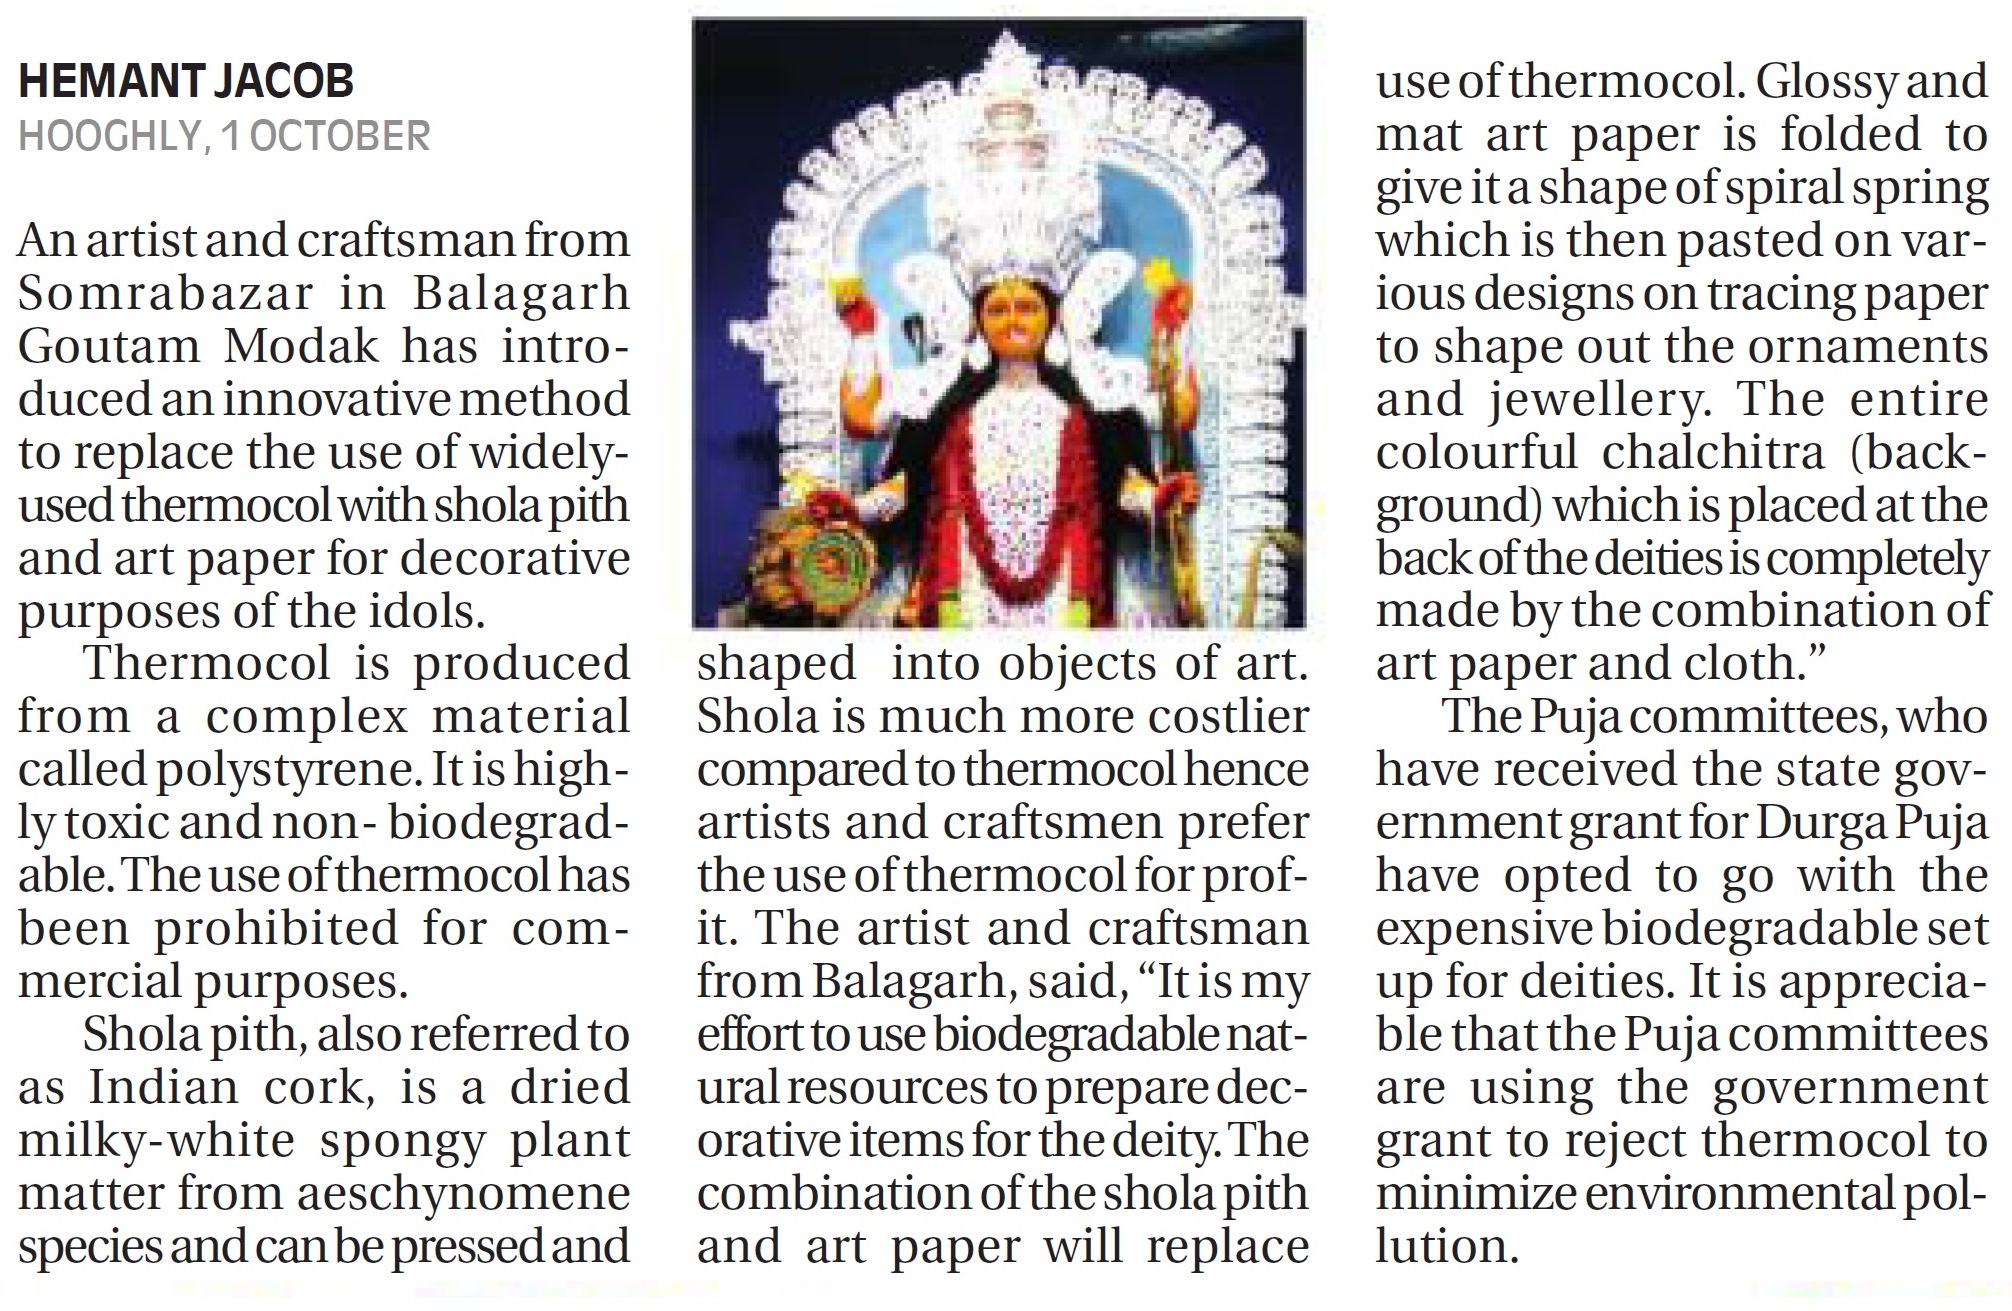 Sholapith, art paper serves as alternative to banned thermocol